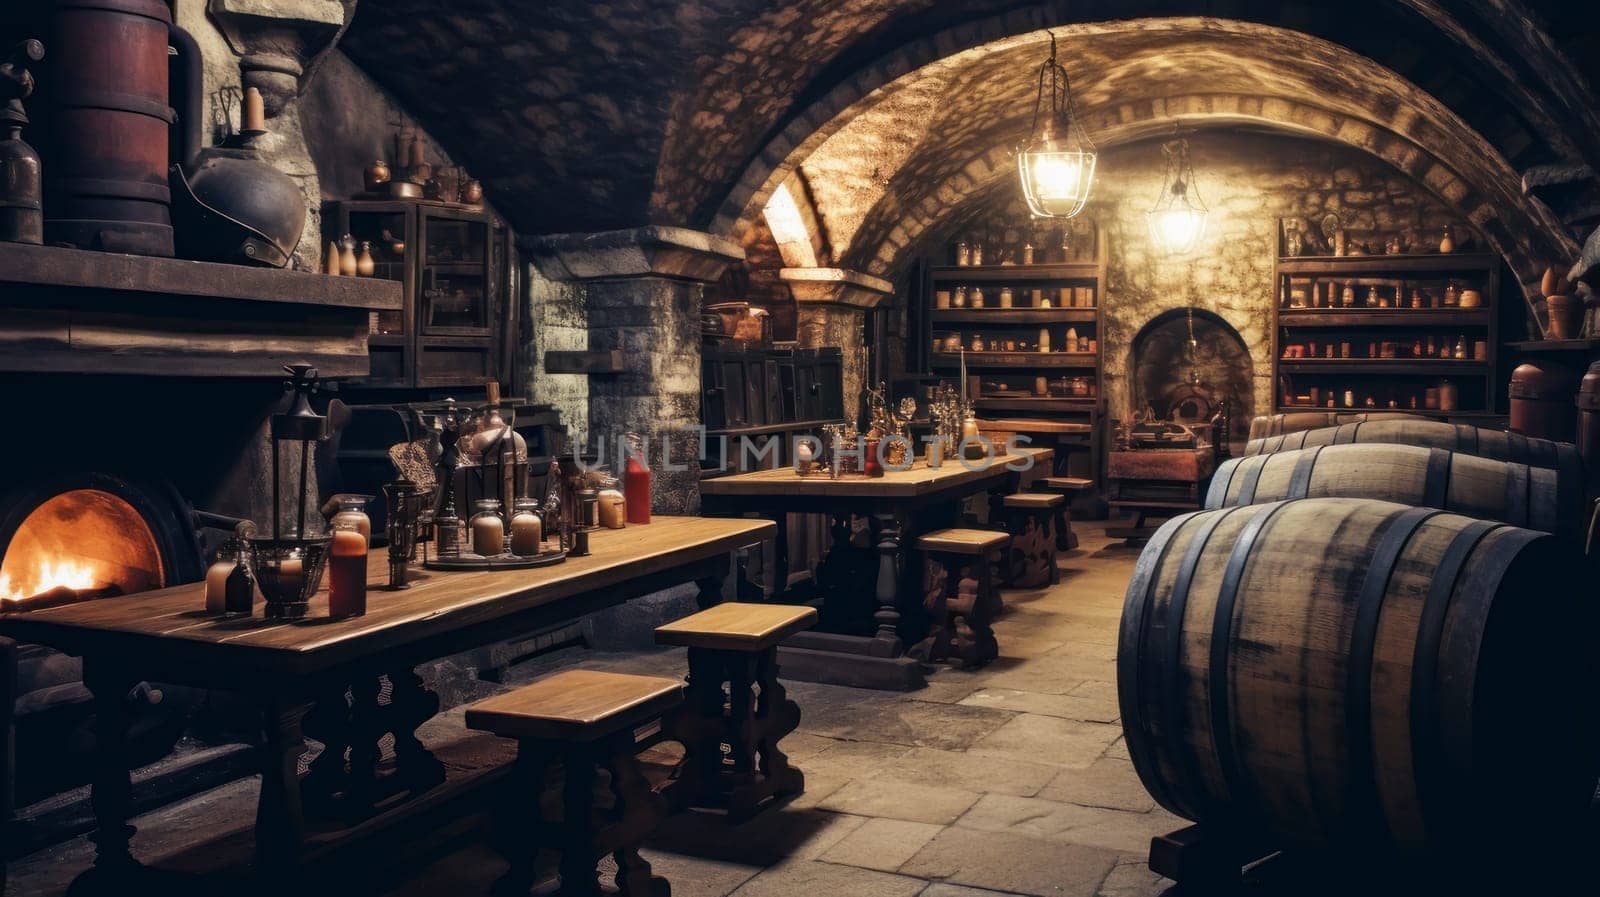 Wine cellar with wine barrels, modern and clean with oak barrels for aging and transport. Wine making, vineyards, tourism business, small and private business, chain restaurant, flavorful food and drinks